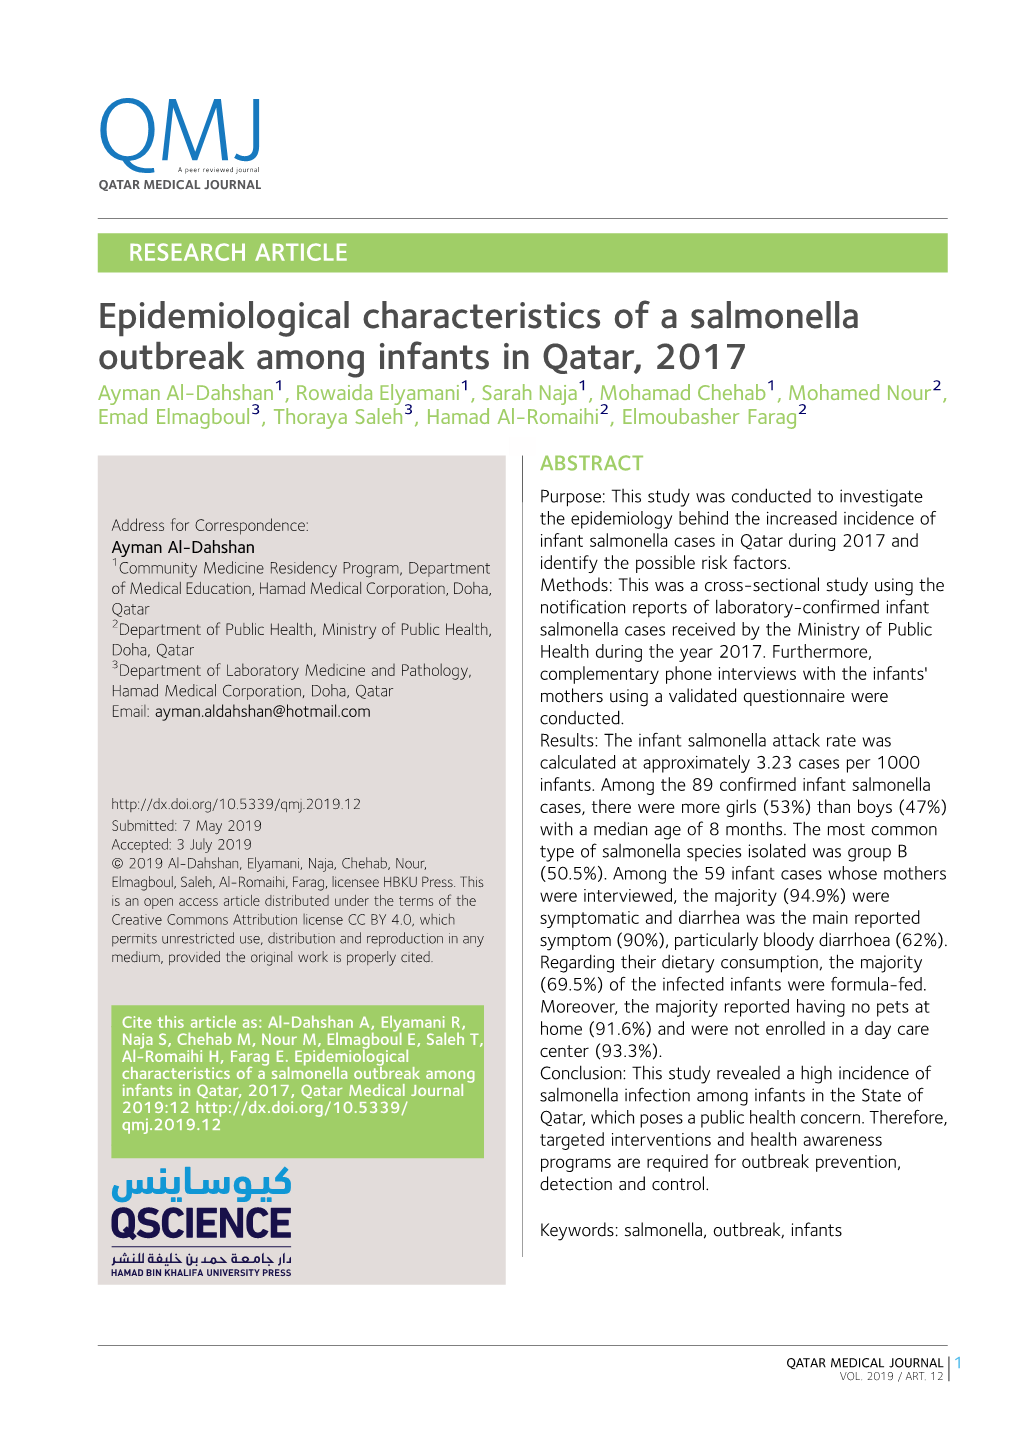 Epidemiological Characteristics of a Salmonella Outbreak Among Infants